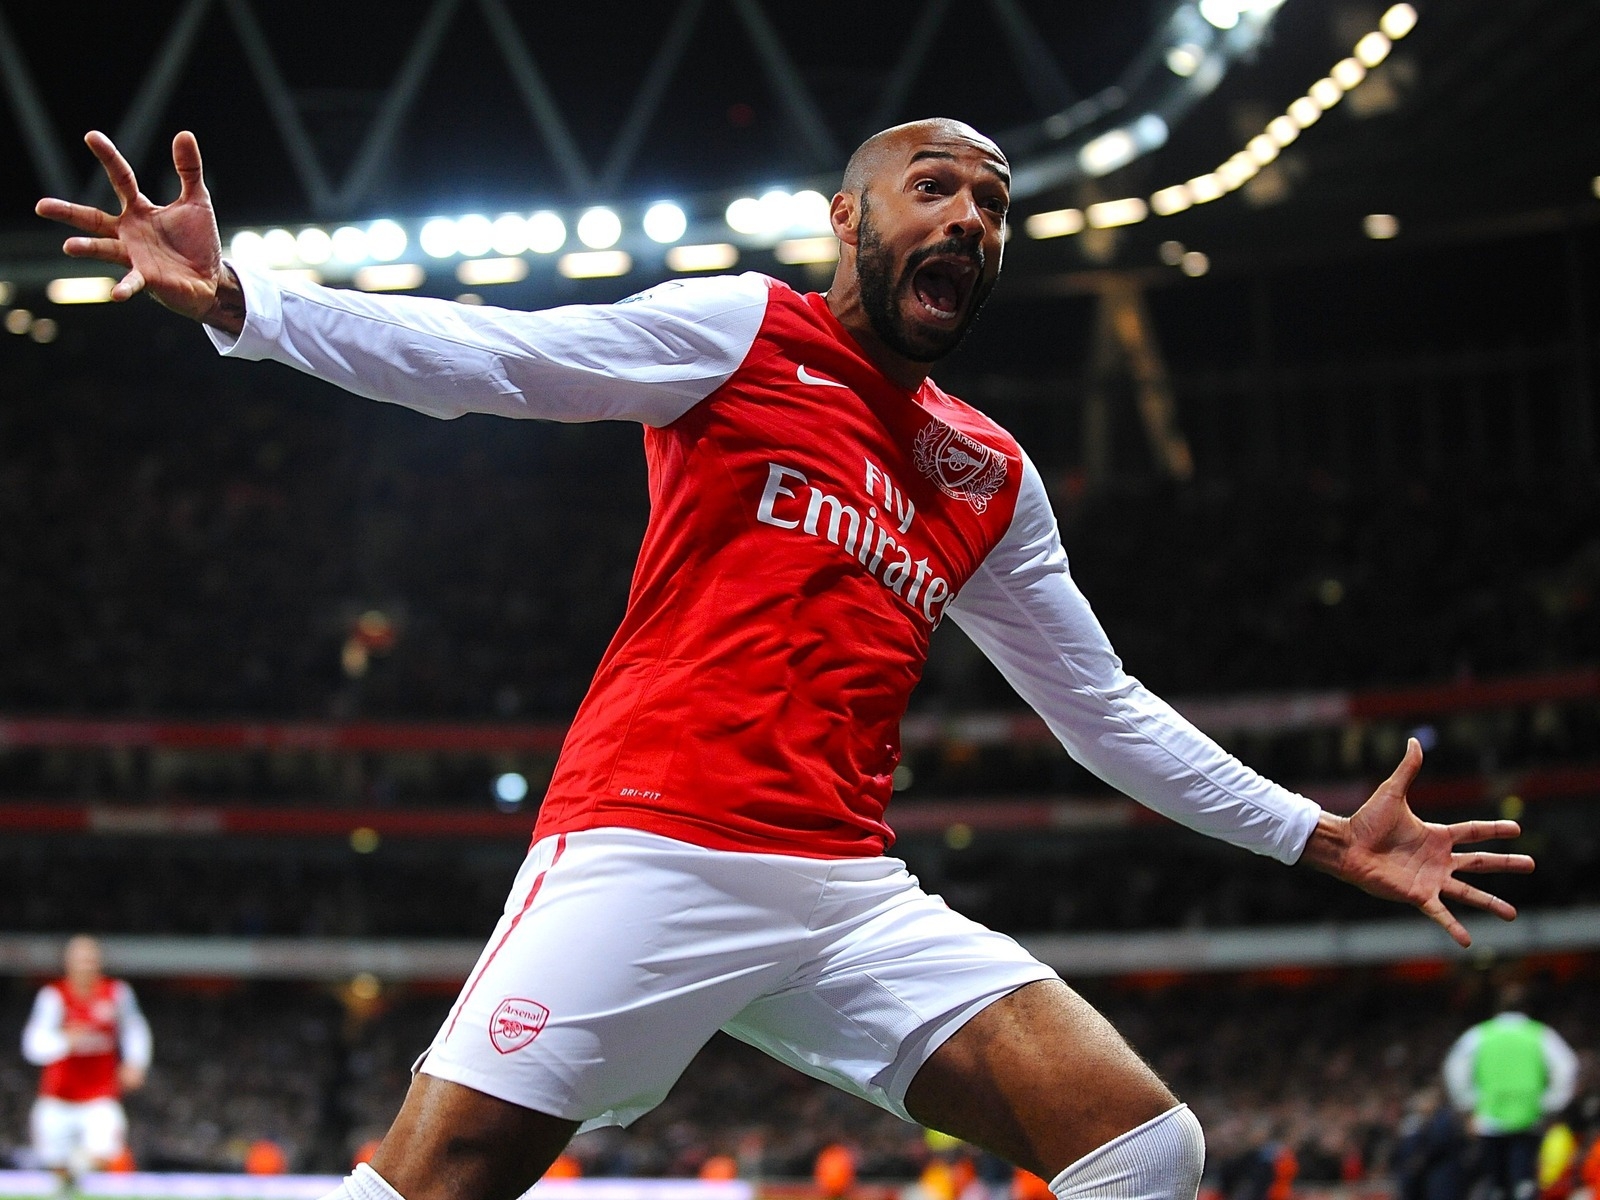 Thierry Henry Arsenal for 1600 x 1200 resolution